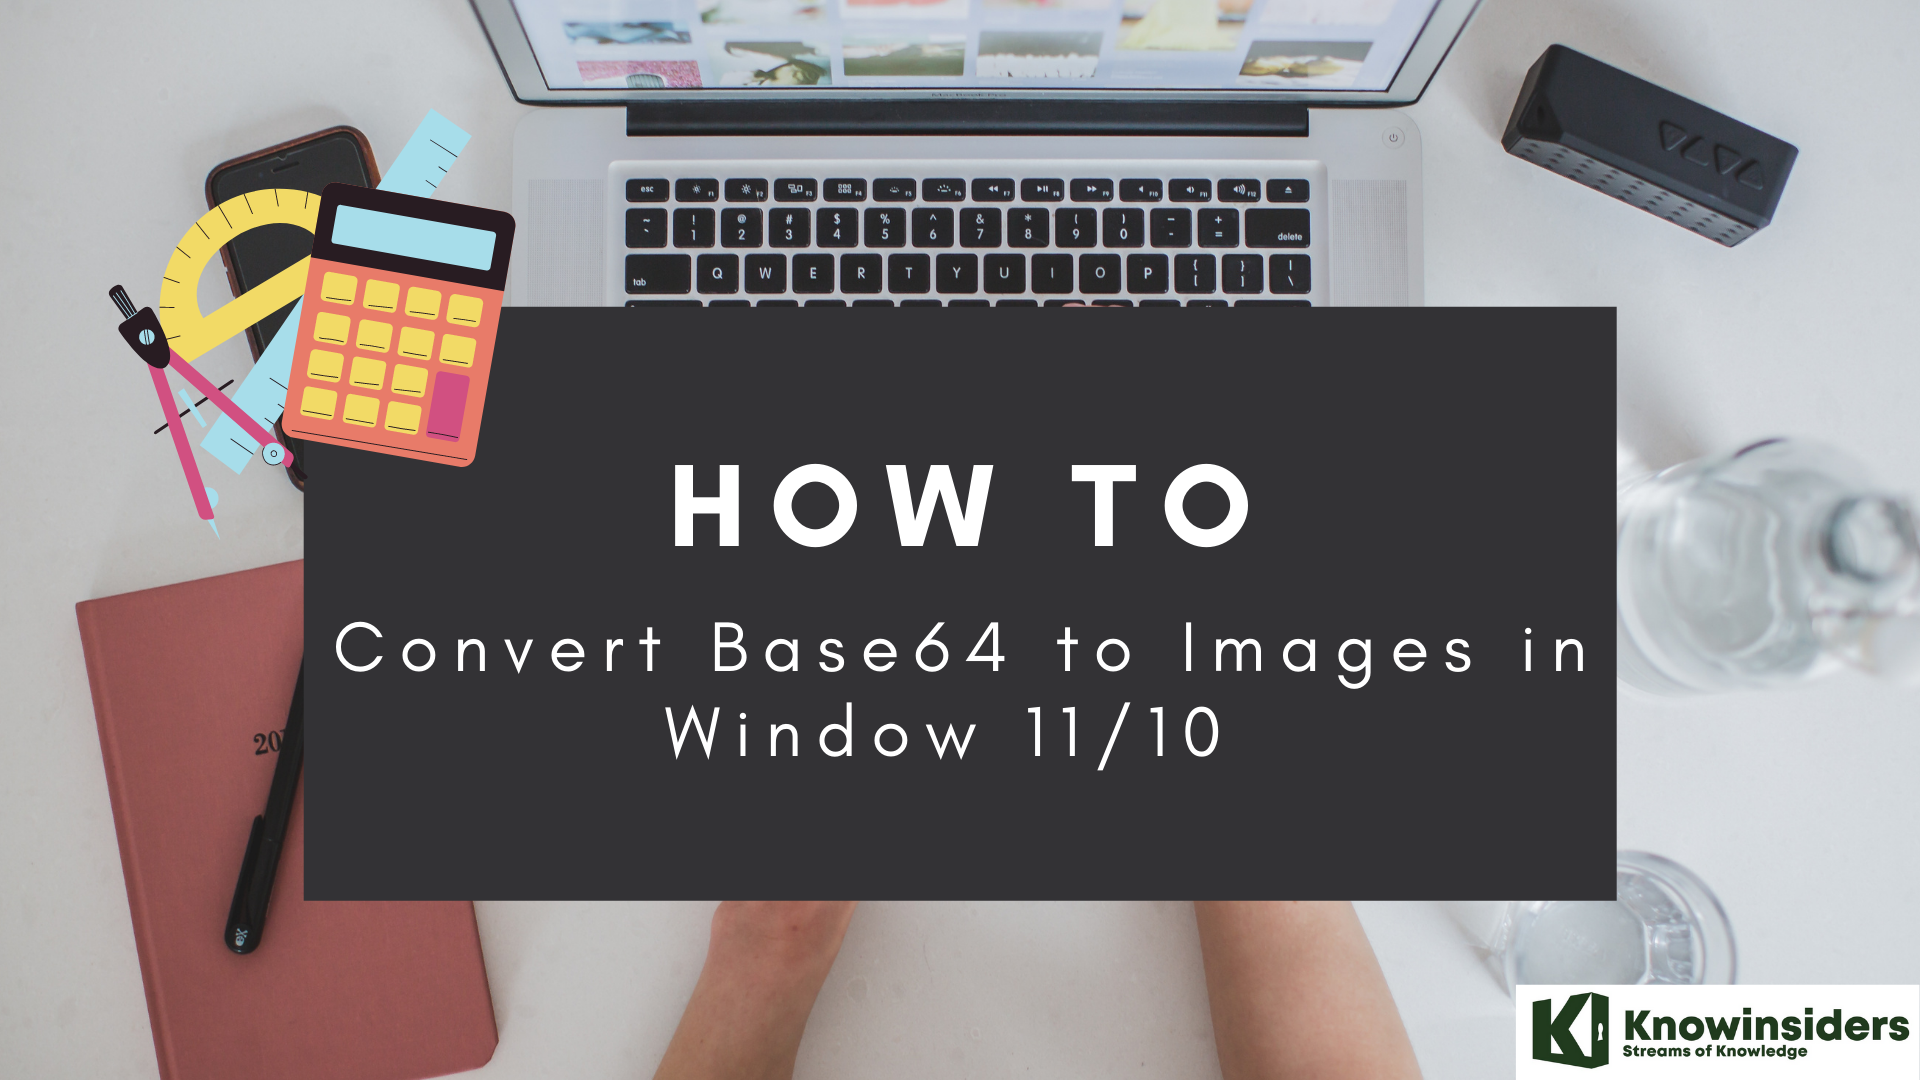 How to convert Base64 to Images in WIndow 11/10